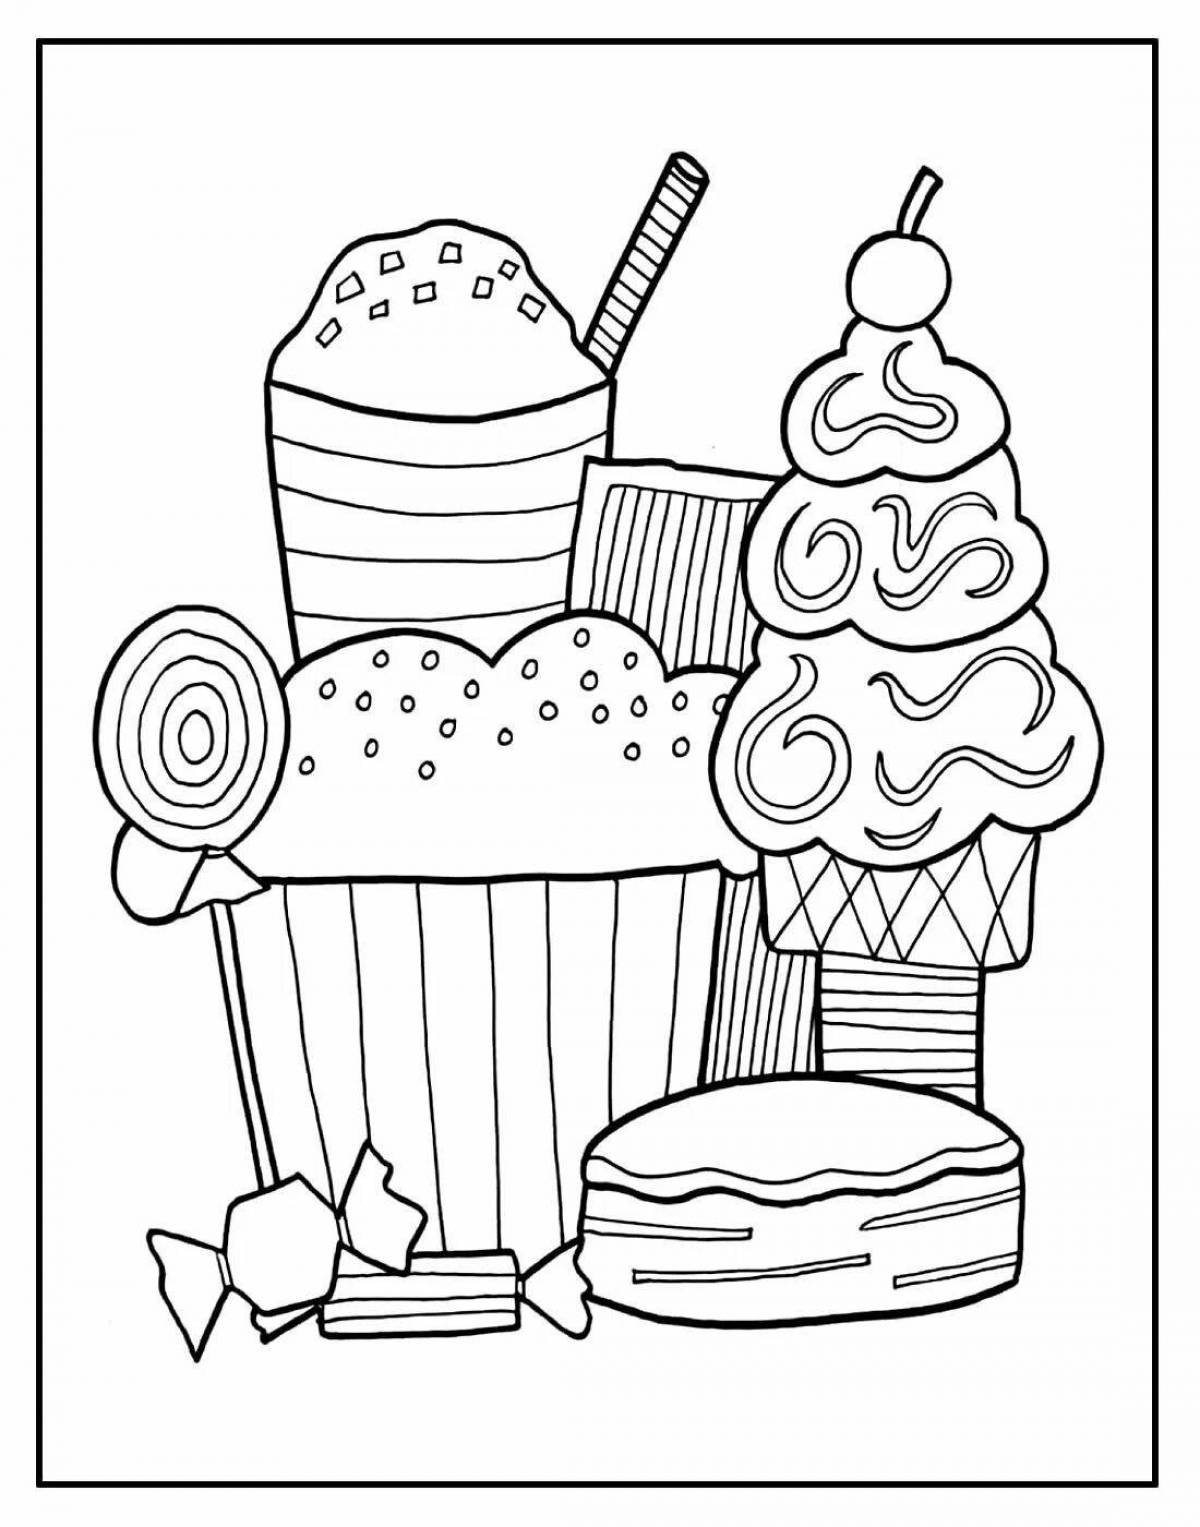 Outstanding sweet world coloring page